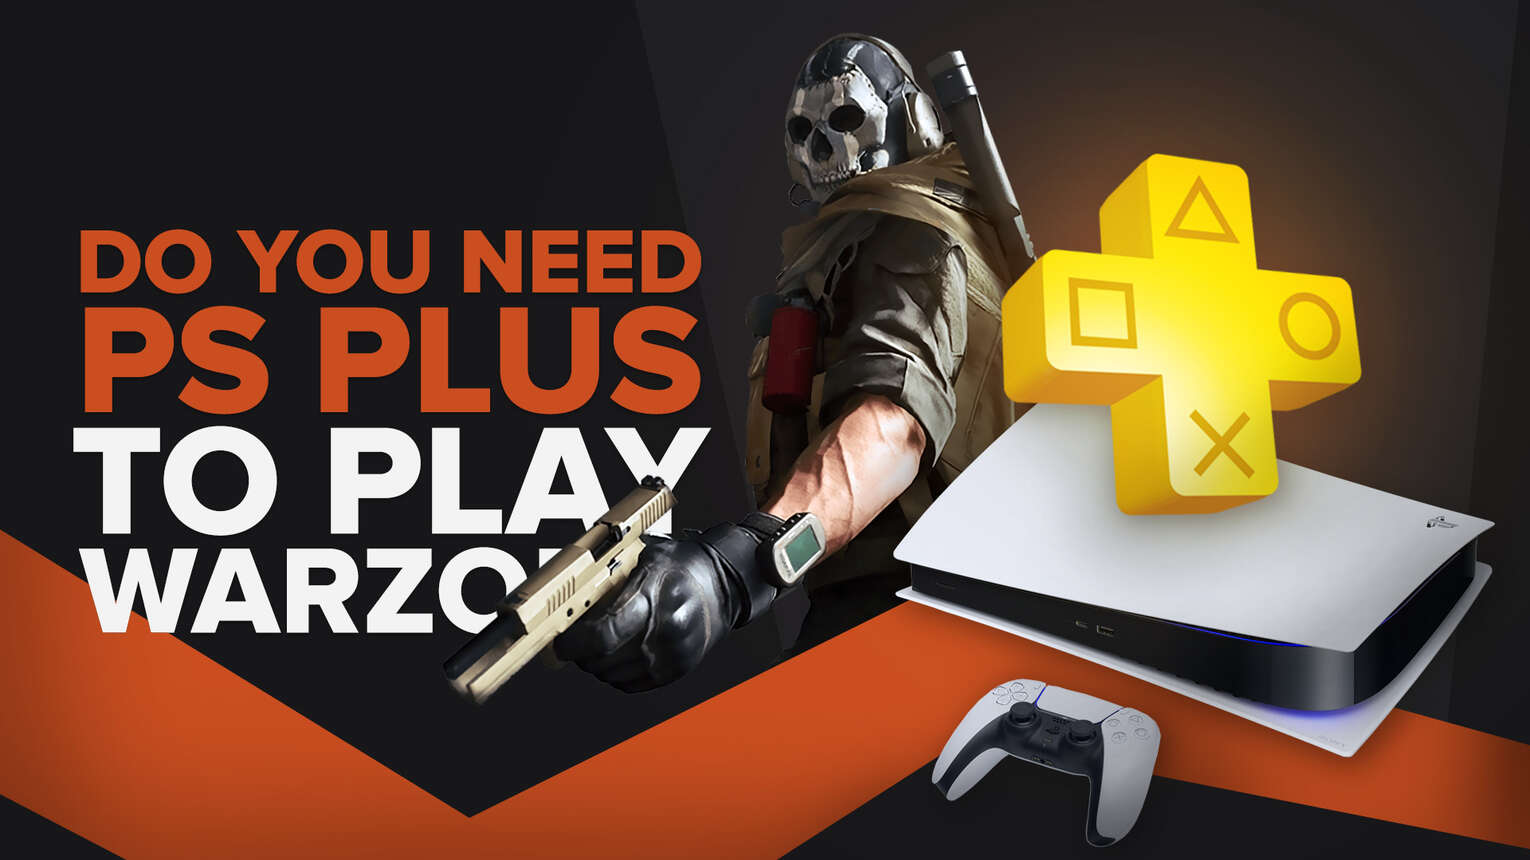 Do You Need PS Plus to Play Warzone? [Explained]